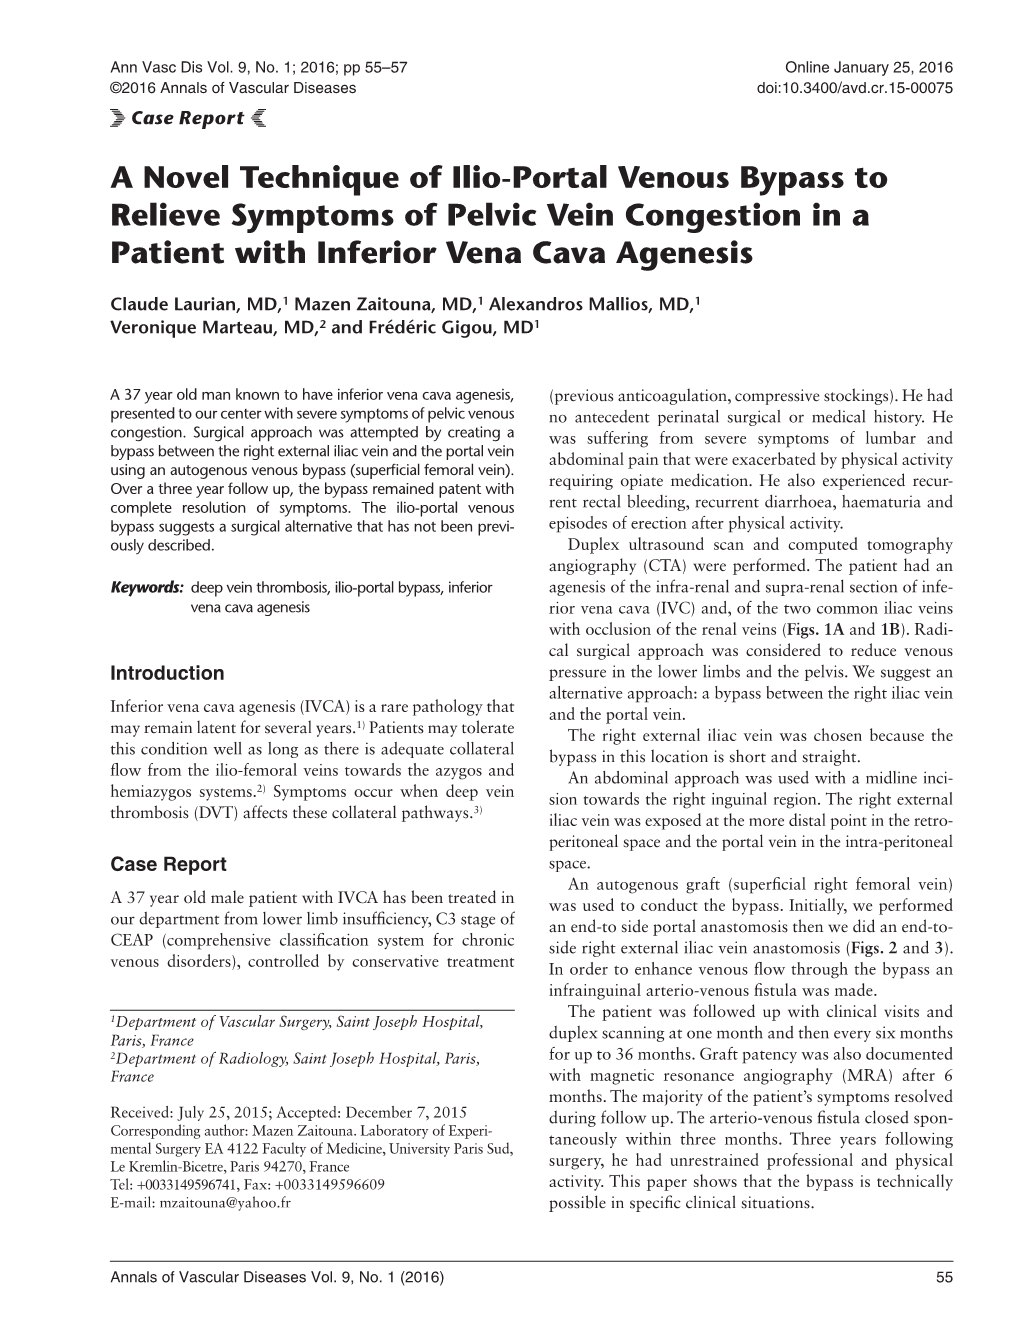 A Novel Technique of Ilio-Portal Venous Bypass to Relieve Symptoms of Pelvic Vein Congestion in a Patient with Inferior Vena Cava Agenesis